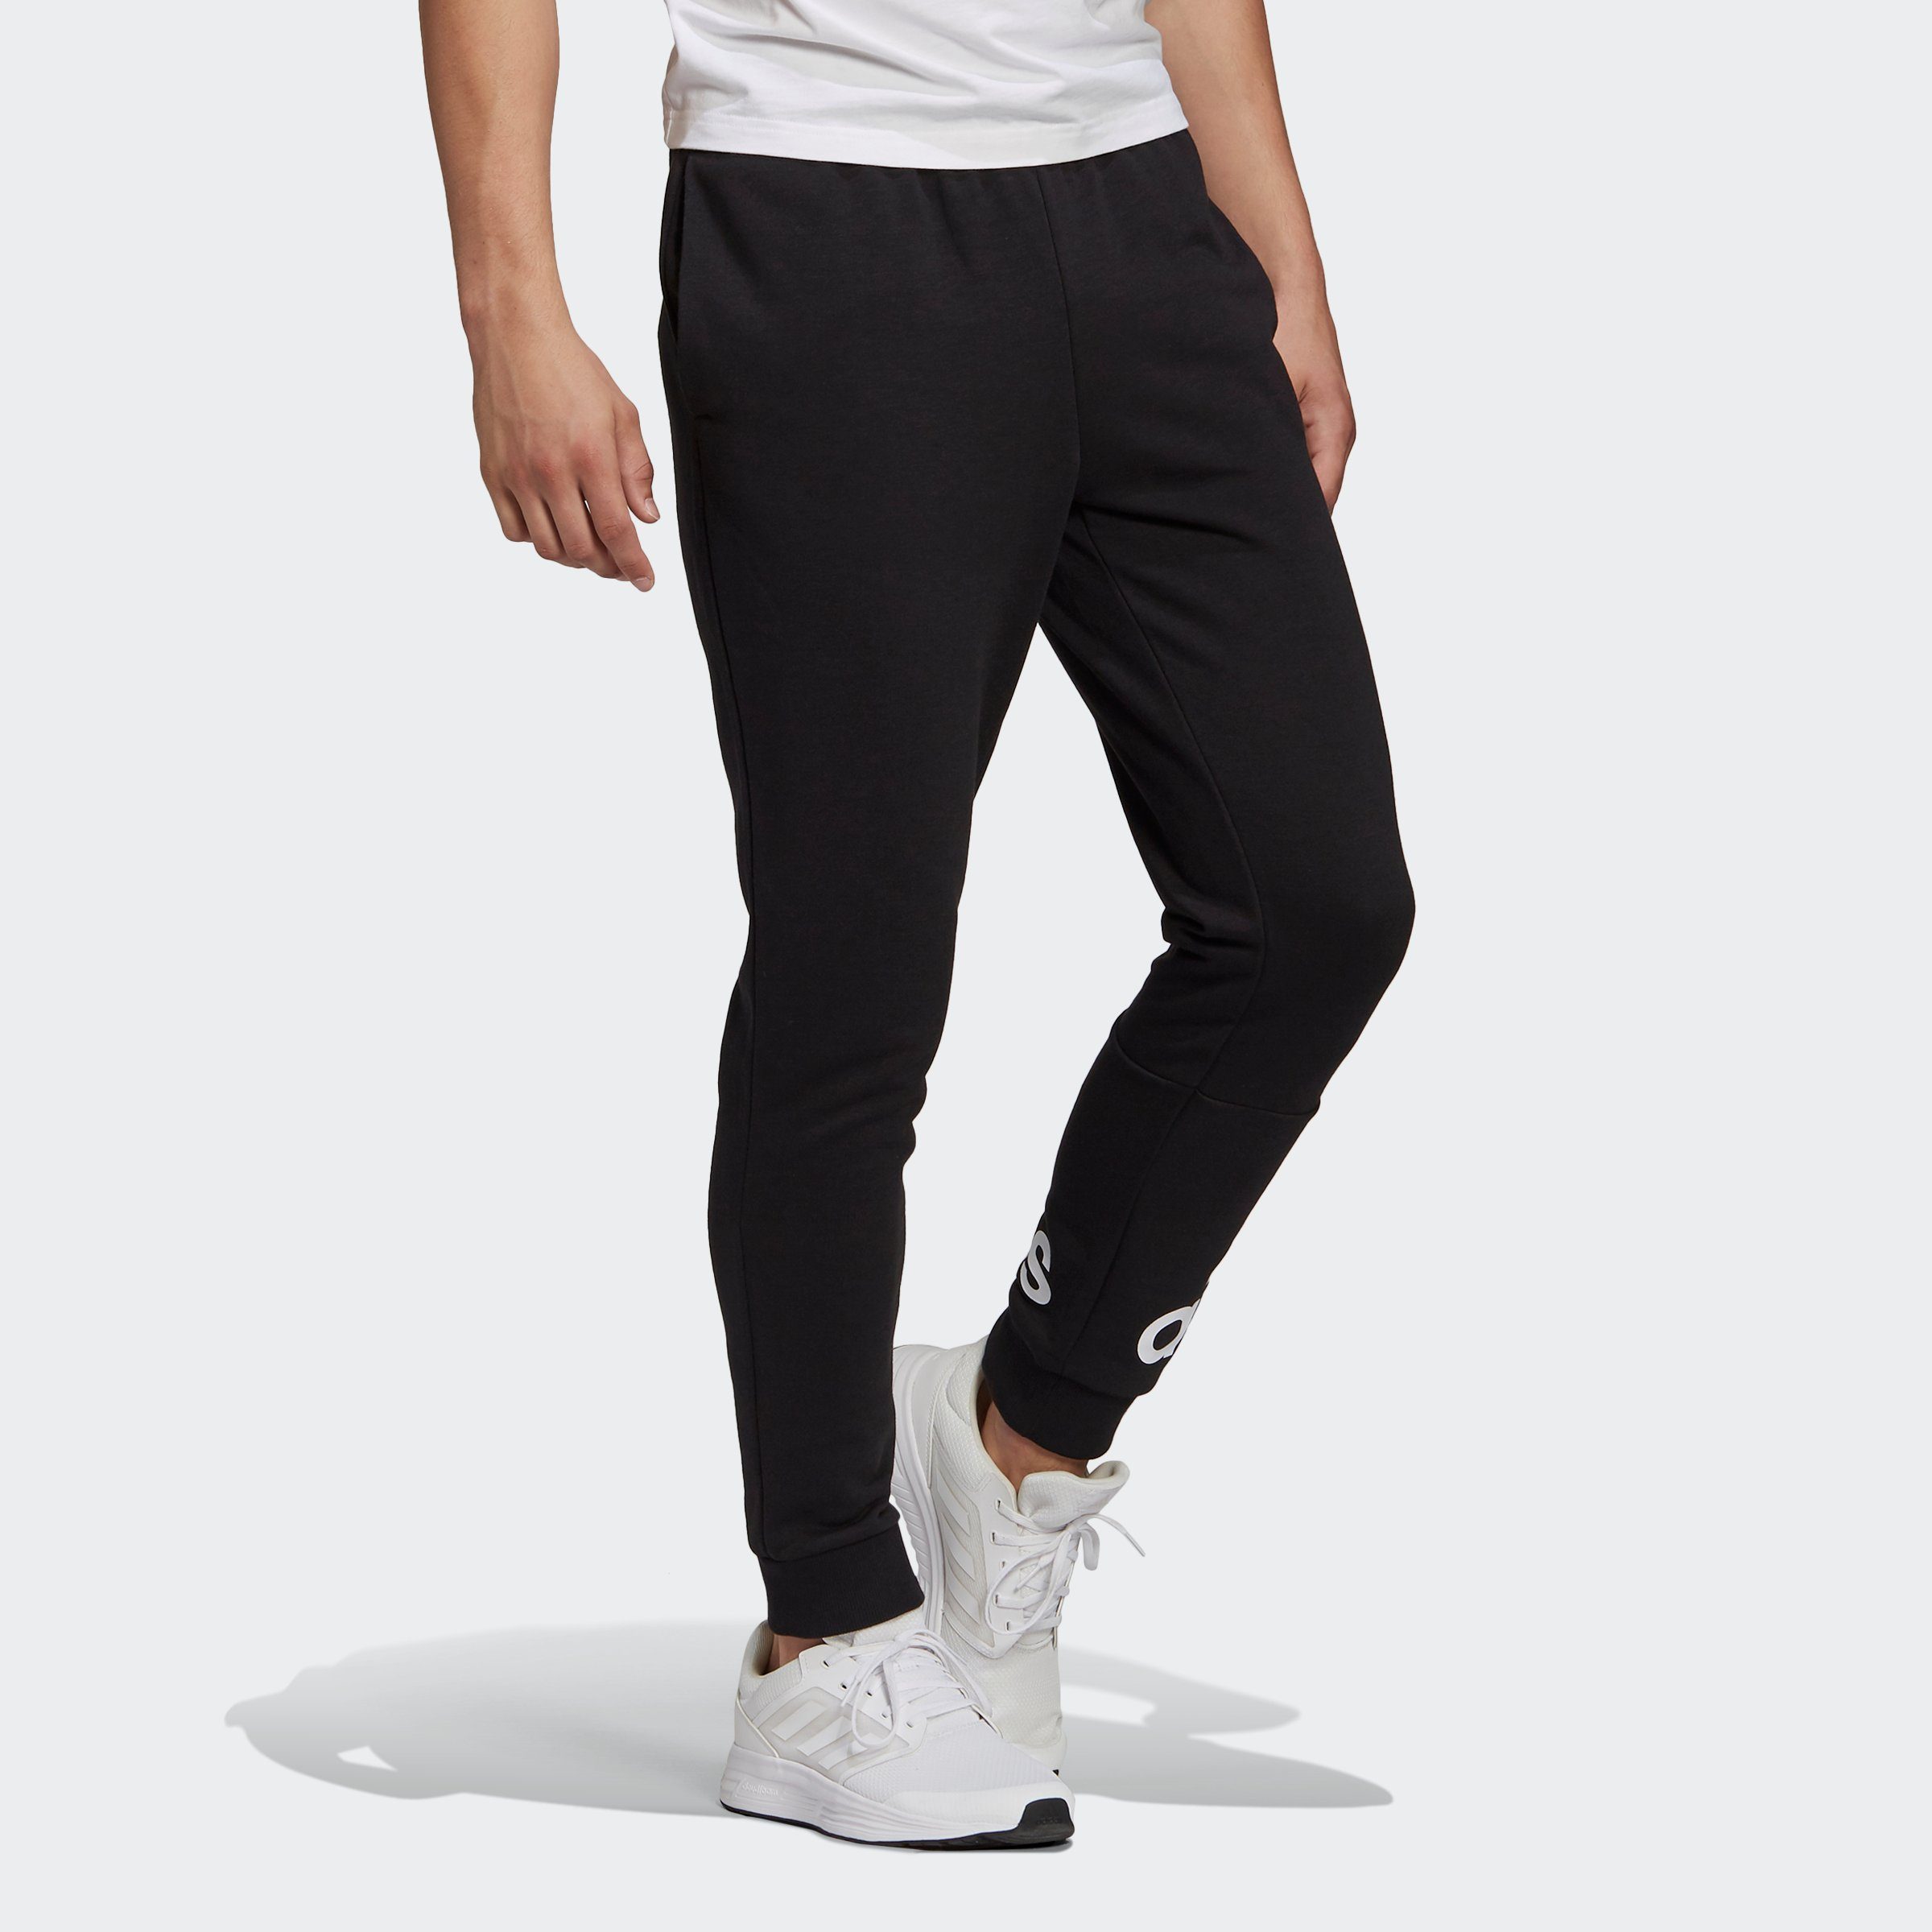 LOGO TERRY ( Polyester / % Sportswear % adidas CUFF 1-tlg), / TAPERED 11 HOSE Baumwolle (French 36 Terry) FRENCH Sporthose % 53 ESSENTIALS Viskose recycelter